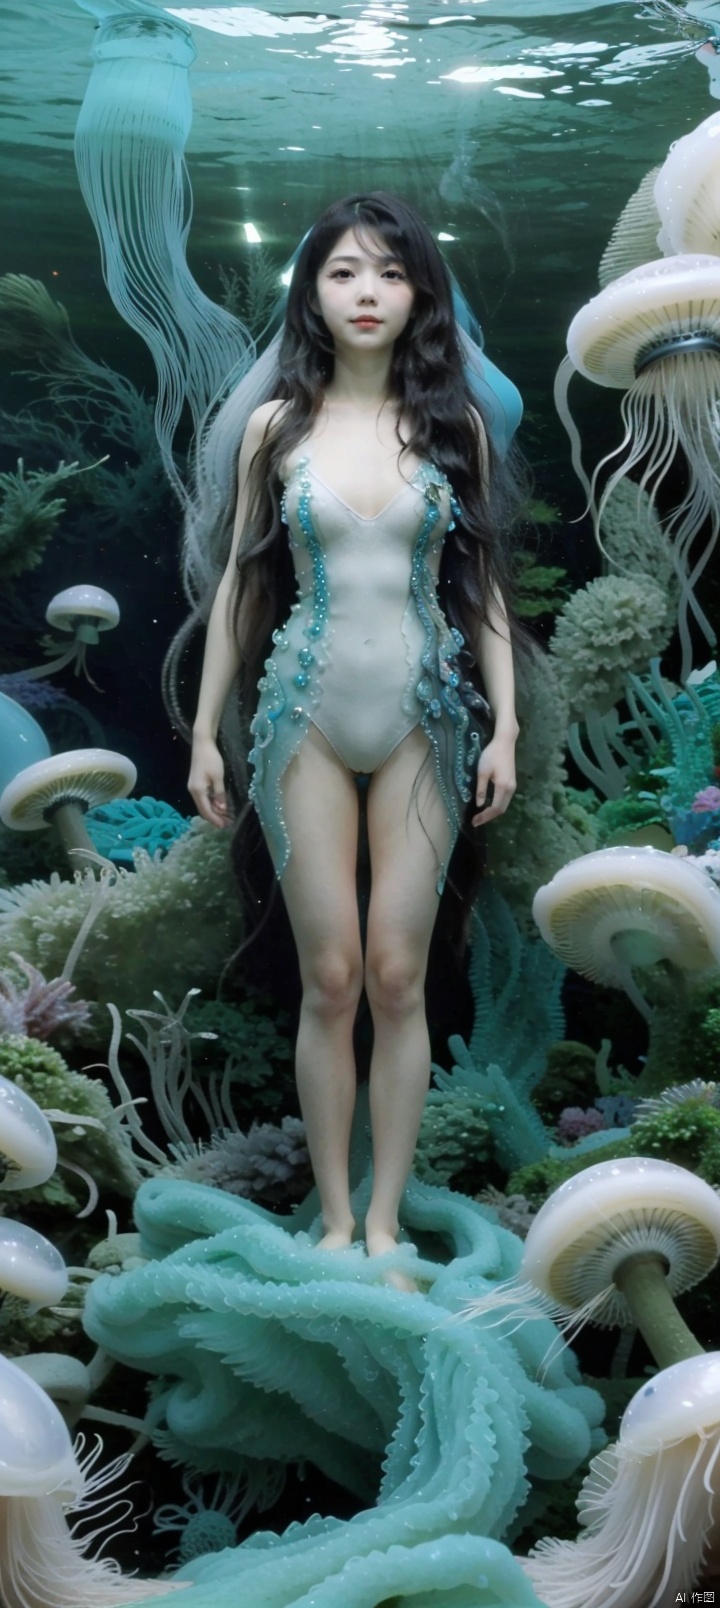   (***** full body:1.5),(very big jellyfish:1.5),(under sea:1.5),(seabed:1.5),smile,happy,exciting,very transparent gauze garment,very transparent clothing,twintails,hair buns,straight hair,long hair,black hair,Narrow shoulders,extremely detailed eyes and face, beautiful detailed eyes,big eyes, jellyfish,coral,octopus,shell,shells,jellyfish,coral,octopus,shell,shells,very long hair,